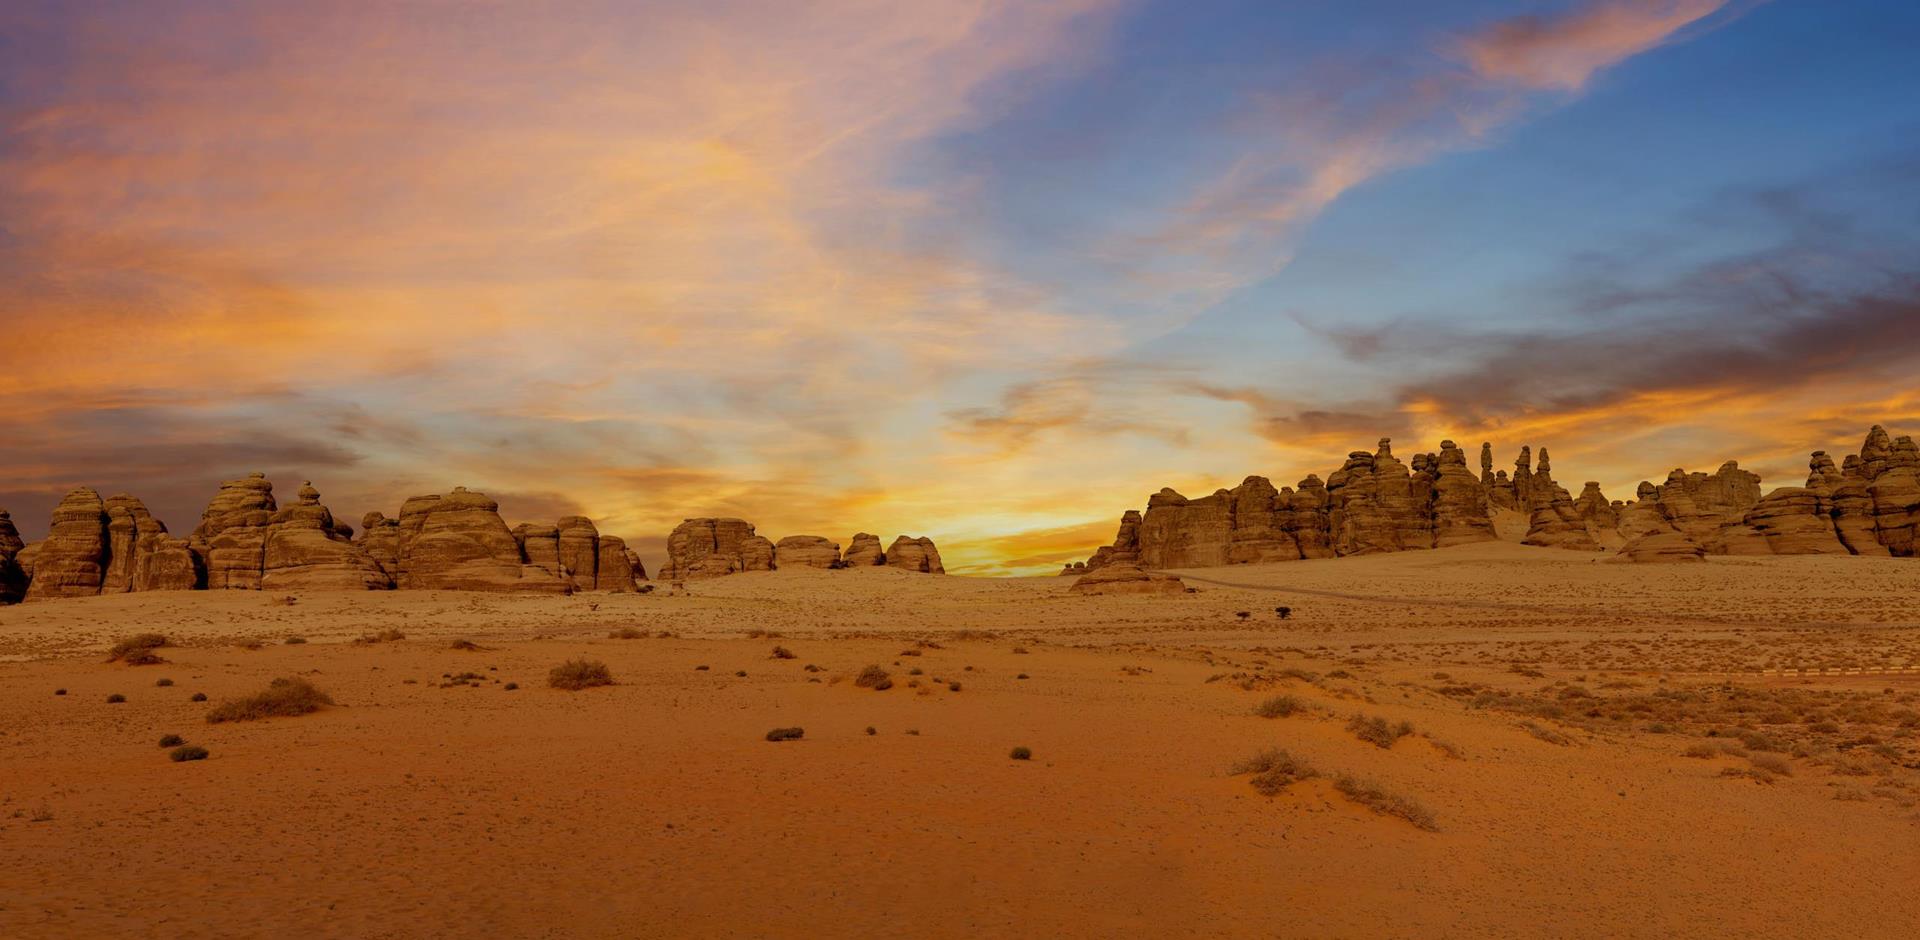 Outcrop geological formations at sunset near AlUla, Saudi Arabia